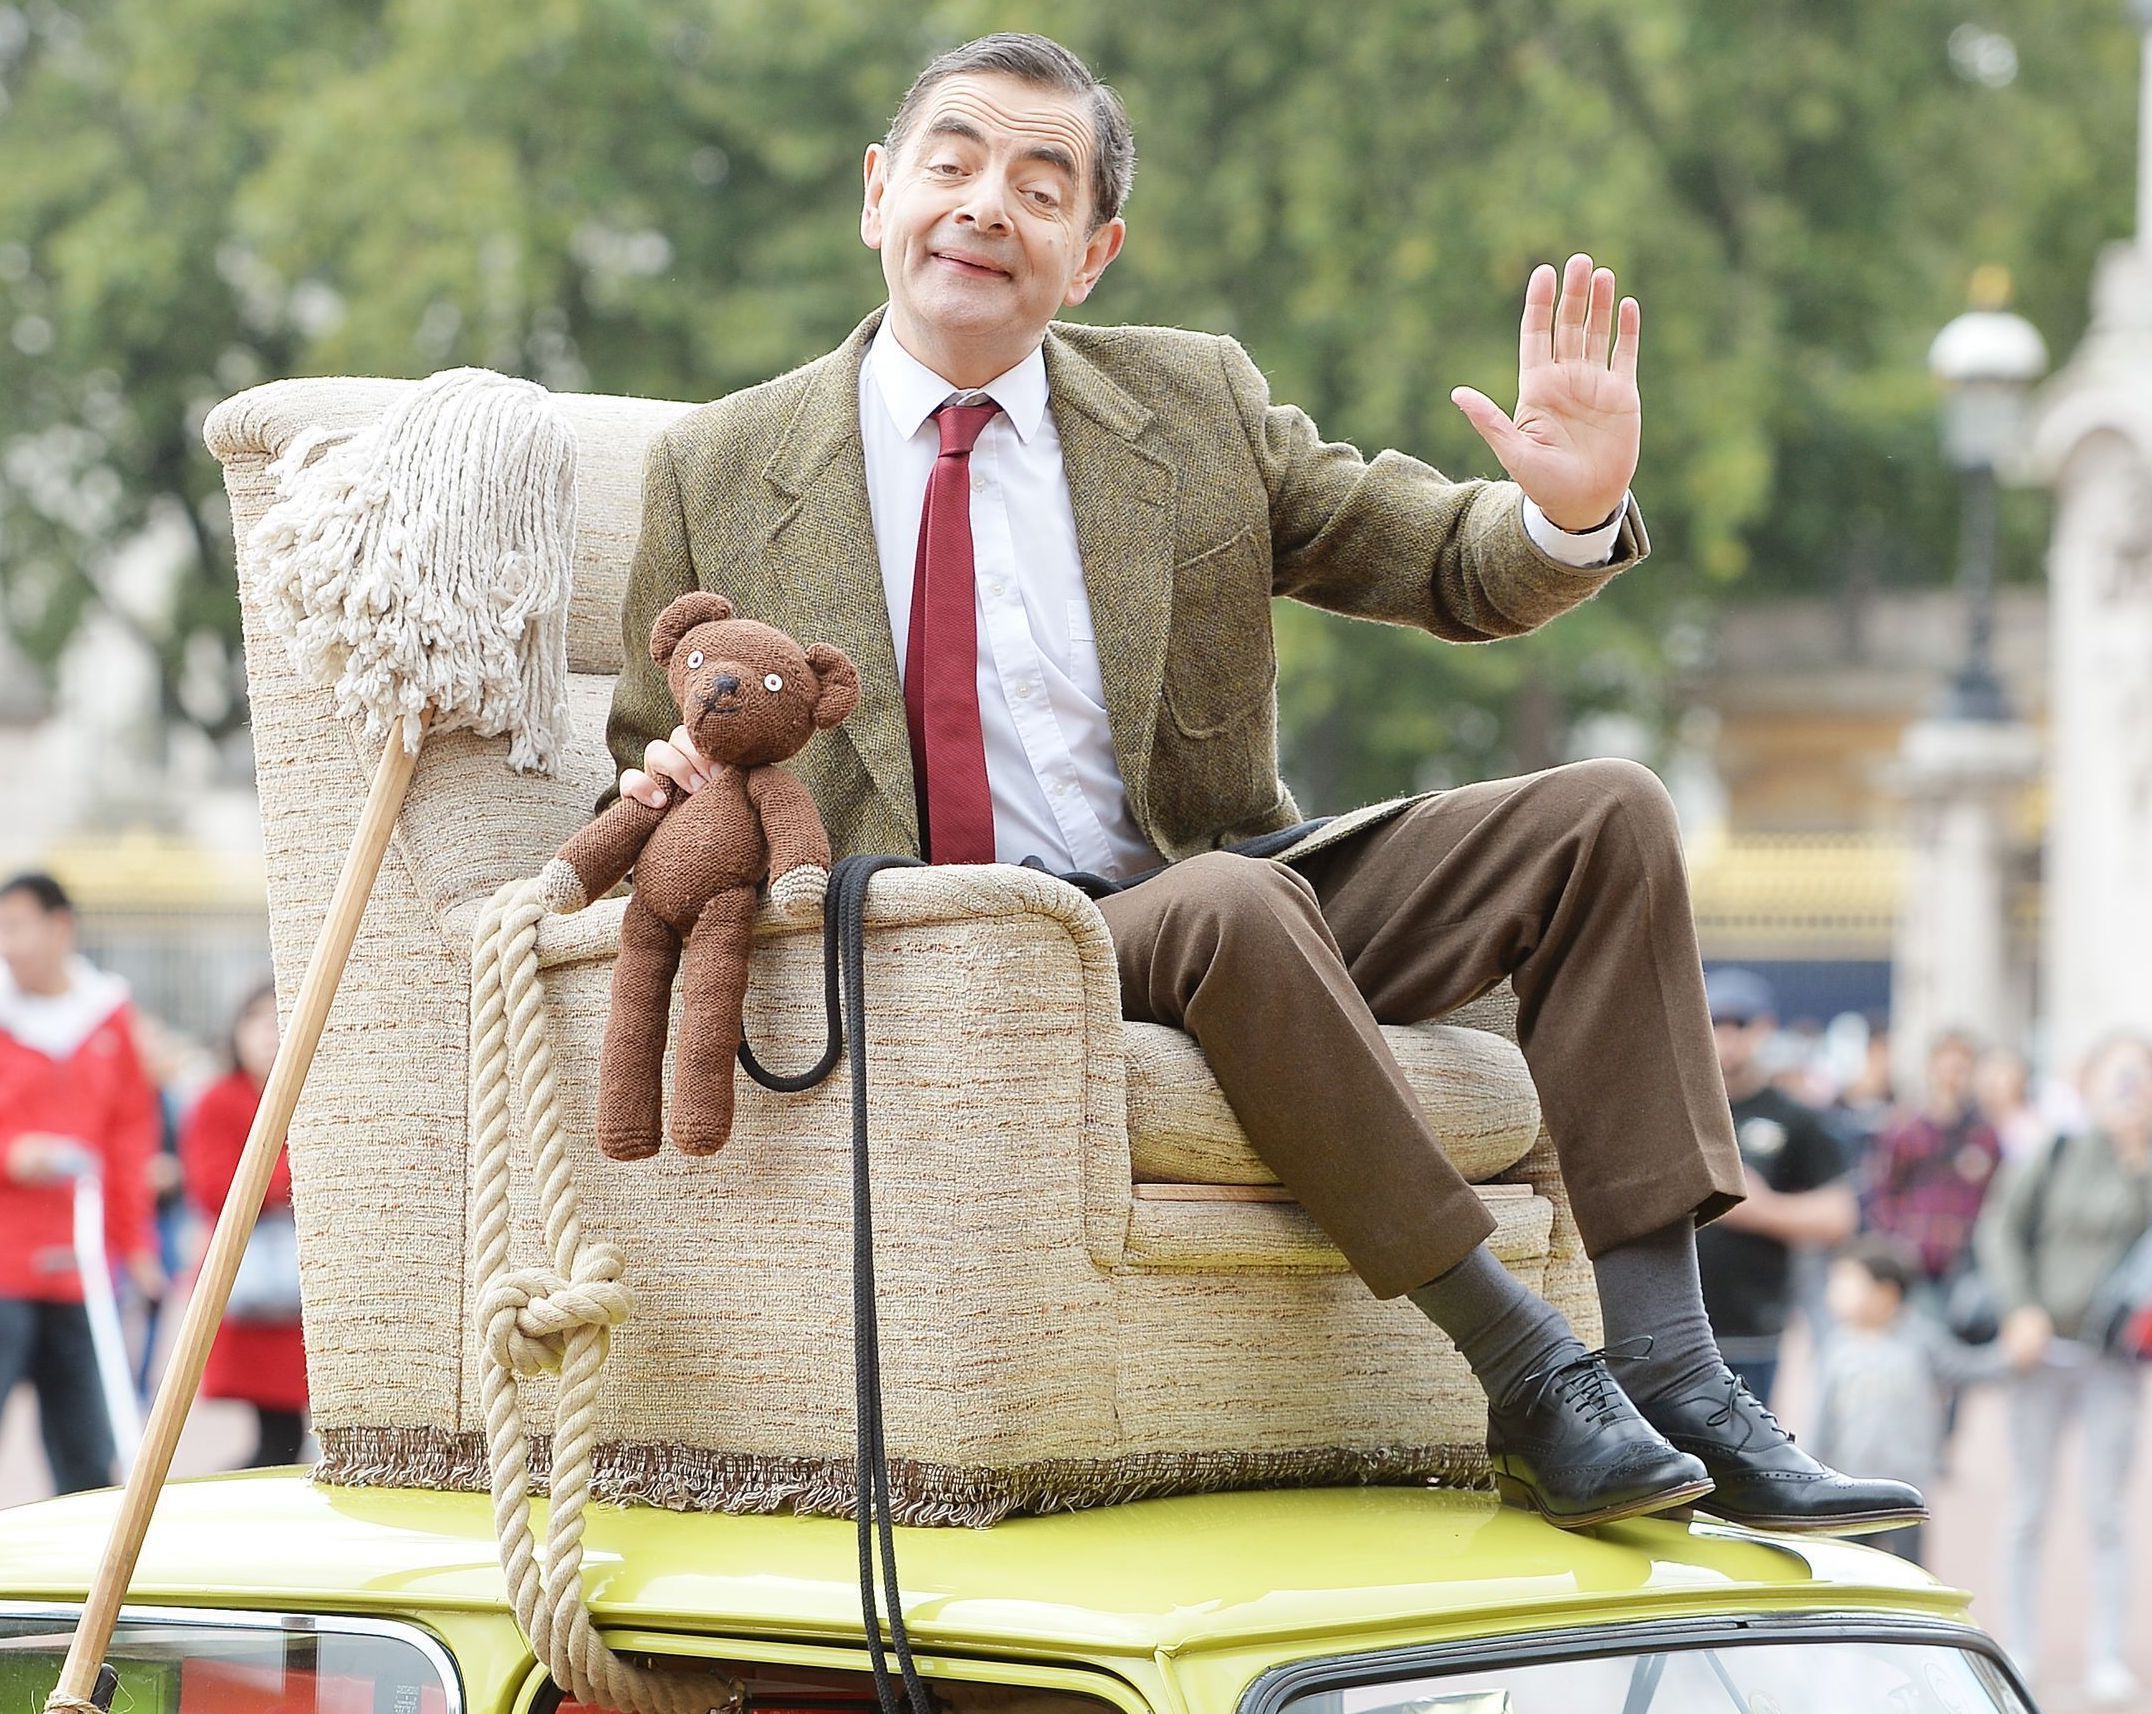 Rowan Atkinson becomes the punchline after speaking out against cancel culture